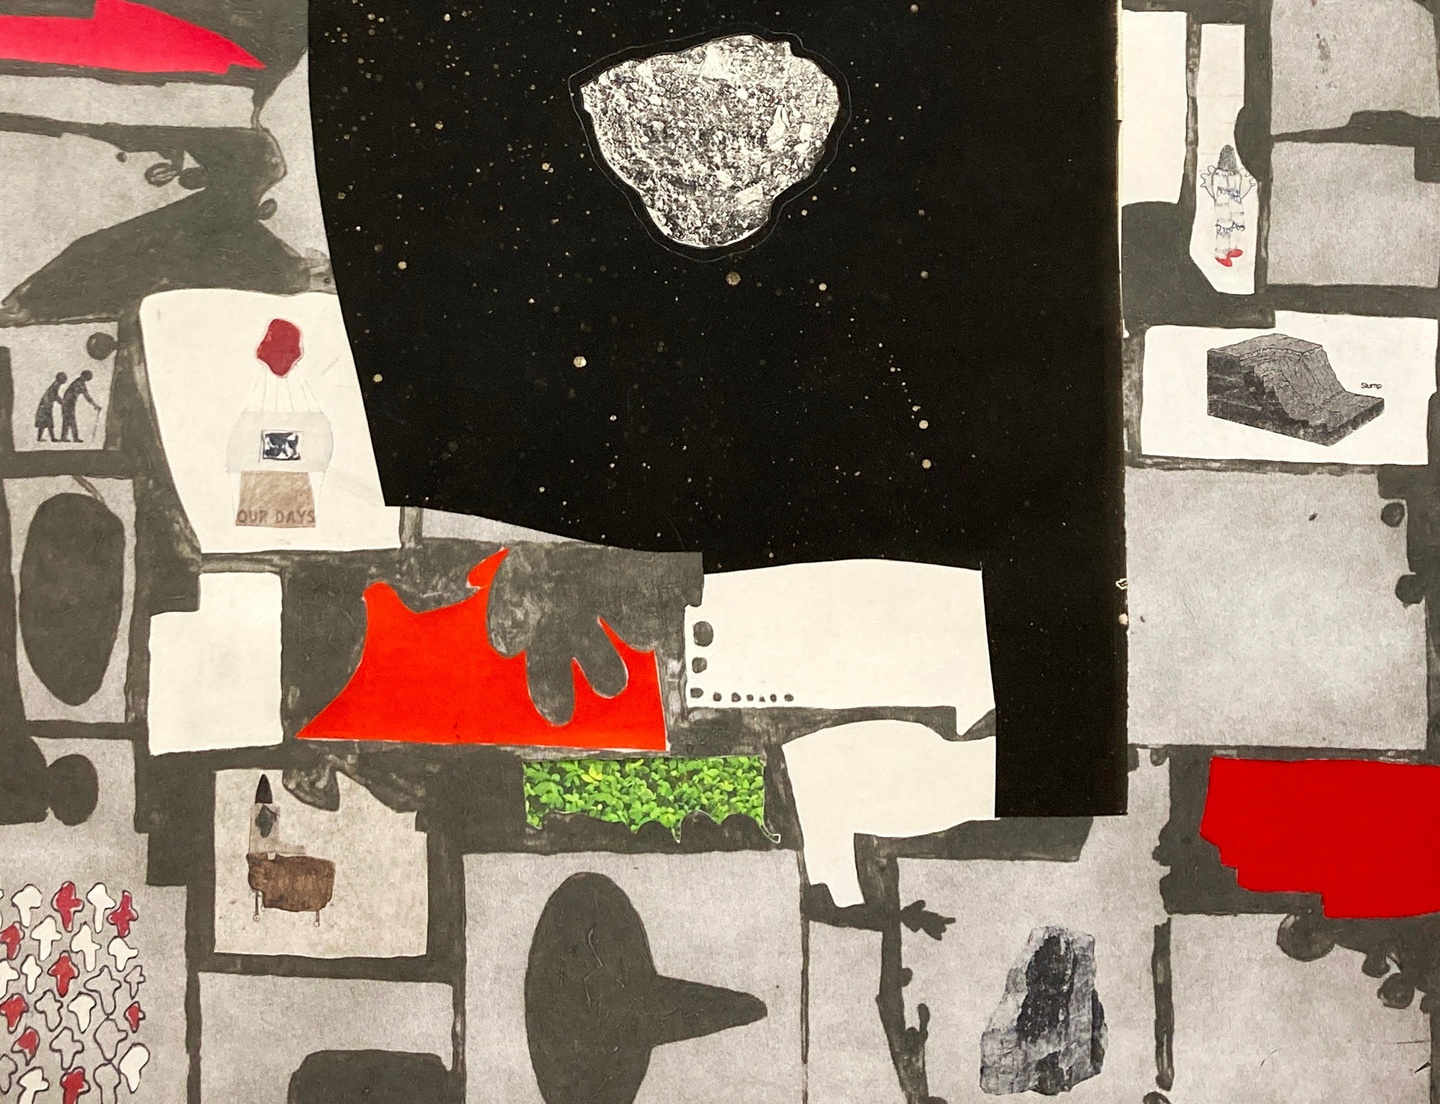 A collage of abstract forms in red, gray, and white. At the center, a large object that looks like an asteroid is collaged over a black background speckled with irregular white dots, like stars in afar-off galaxy. Some pieces also have images of objects printed on them, like boulders or leaves, or cutouts overlaying them, like silhouettes of people.